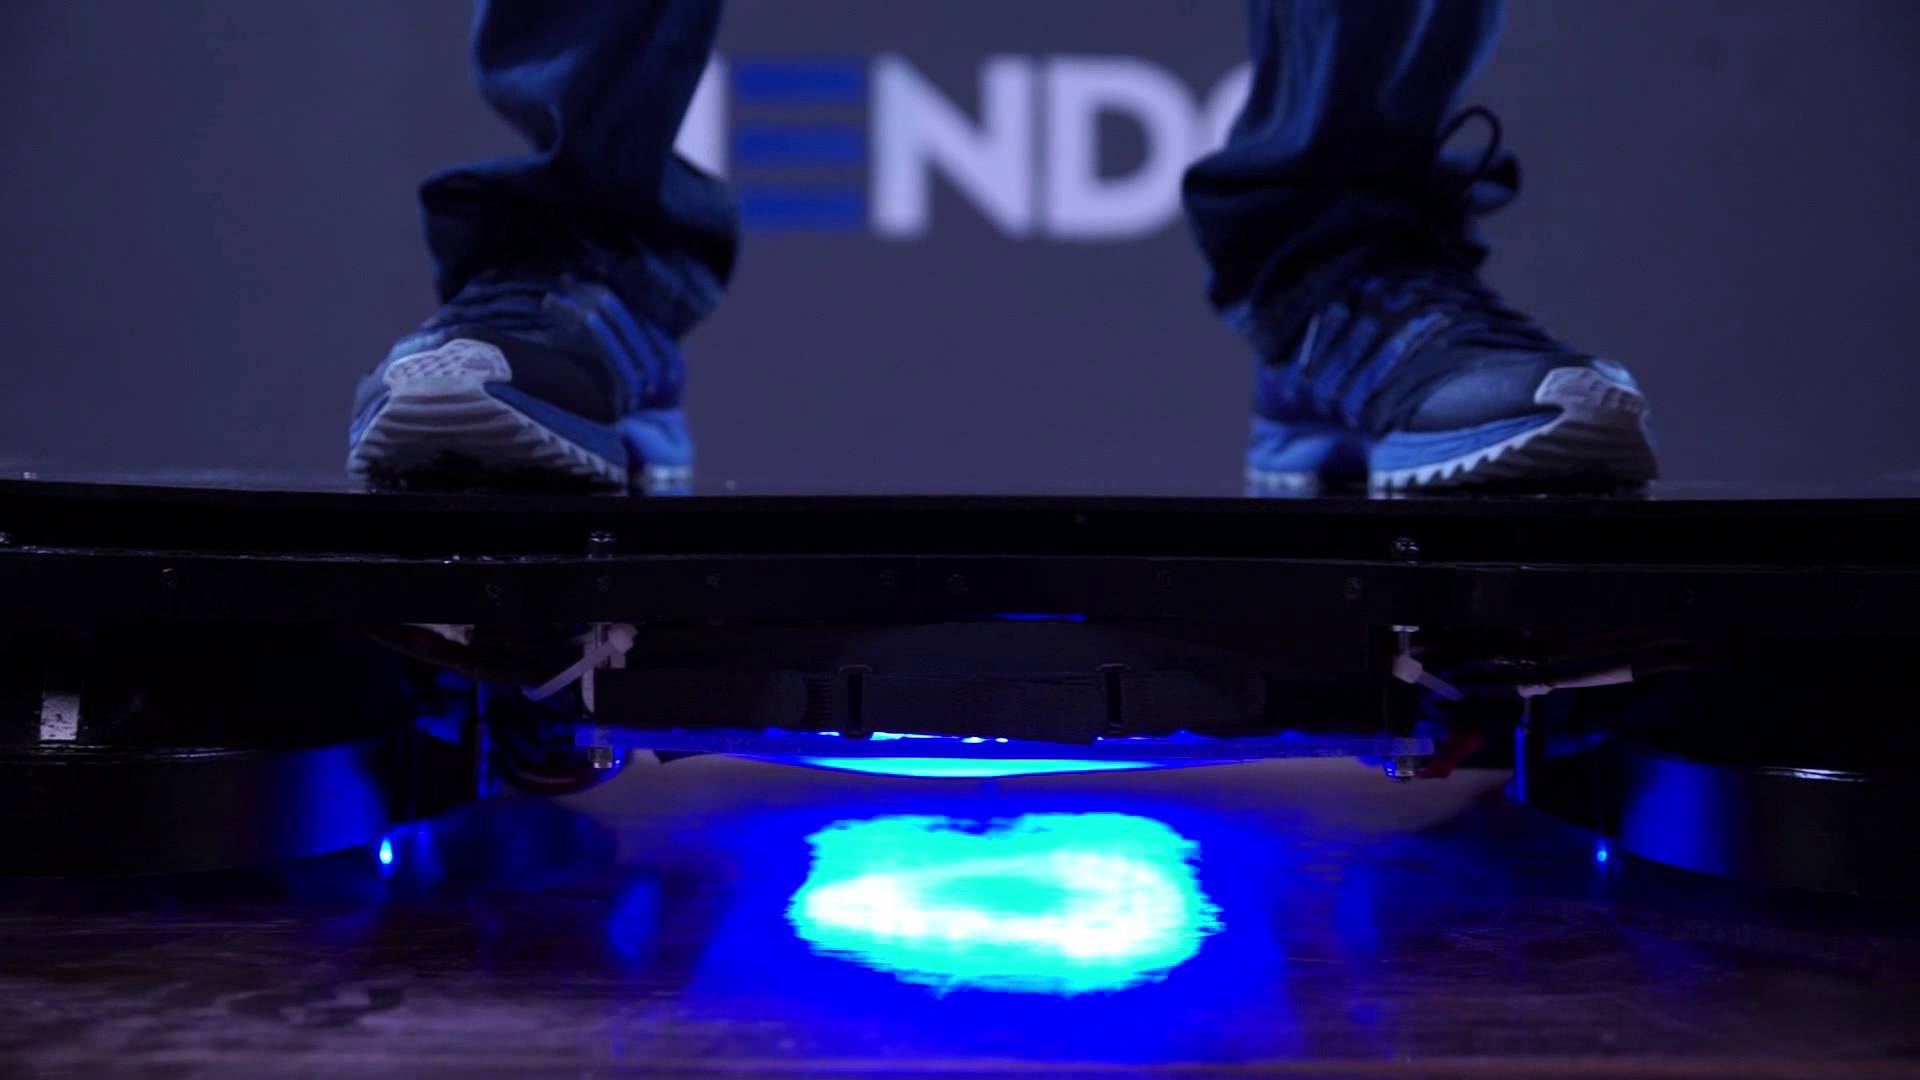 Hendo Hoverboard: The World's First Hoverboard